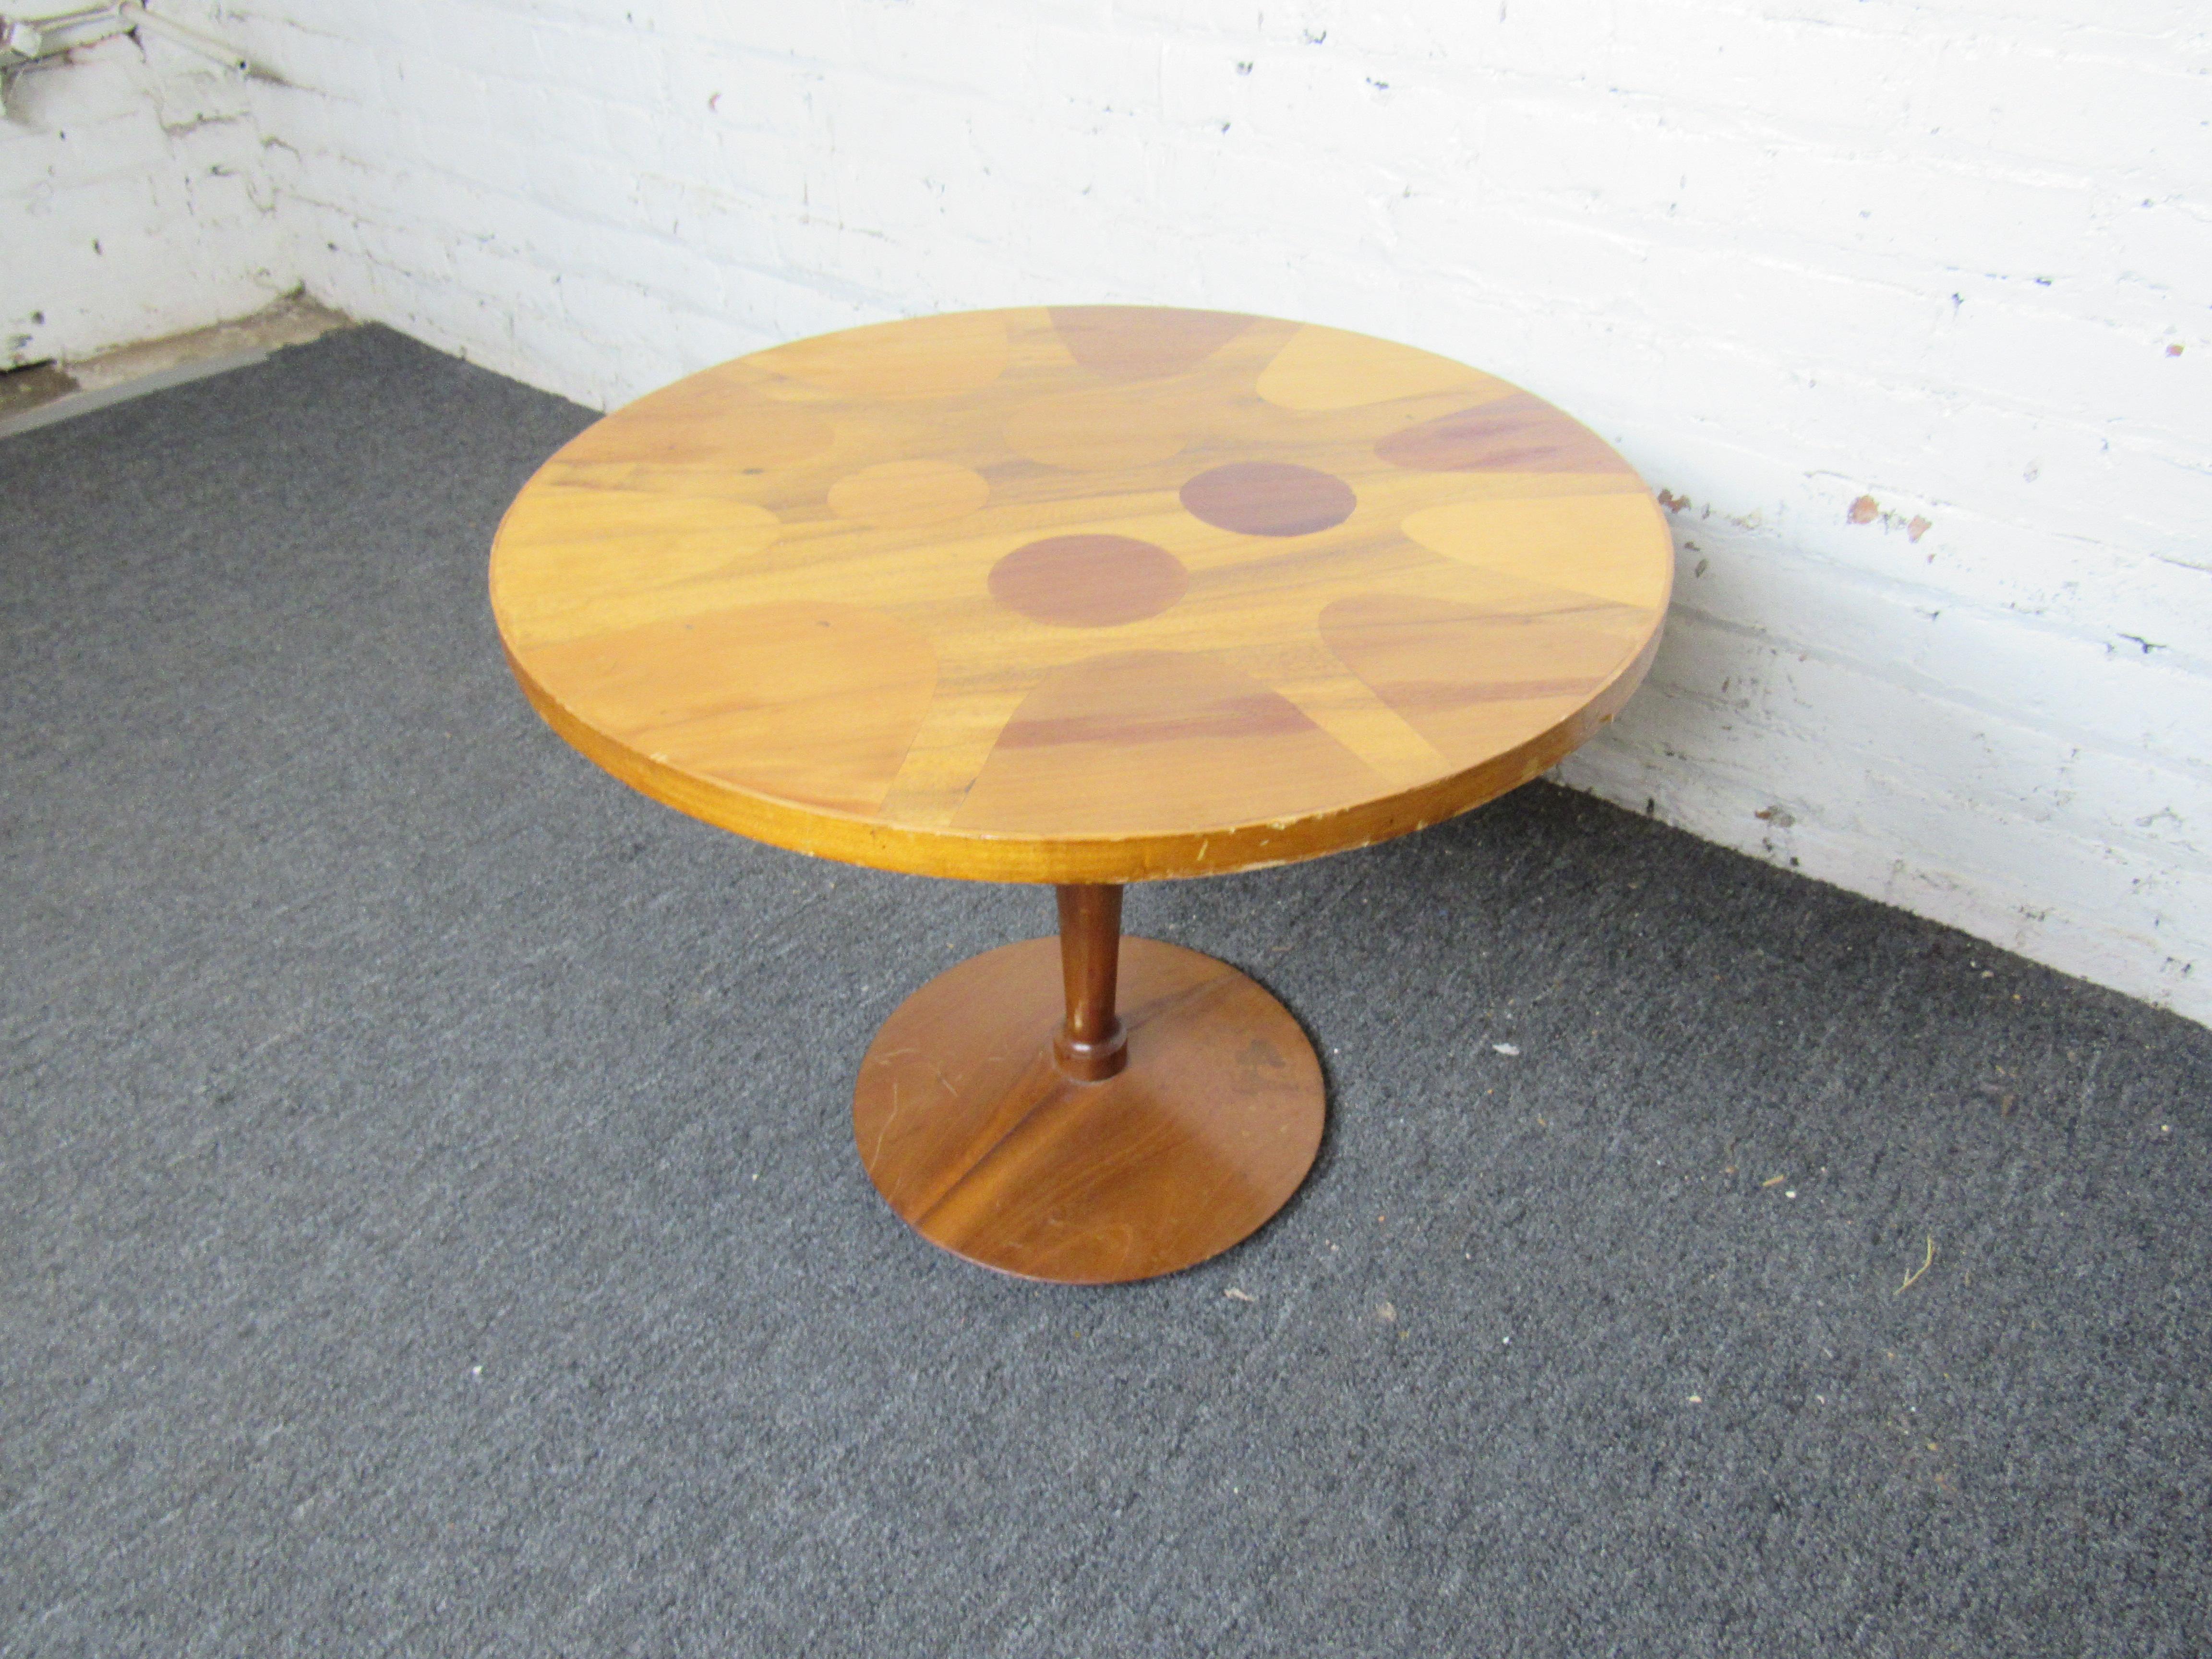 This interesting vintage table is perfect for enjoying a cocktail or coffee with guests. Featuring a circular design using different shades of stained wood as well as a sleek sculpted base, this table is sure to make an eye-catching addition to any